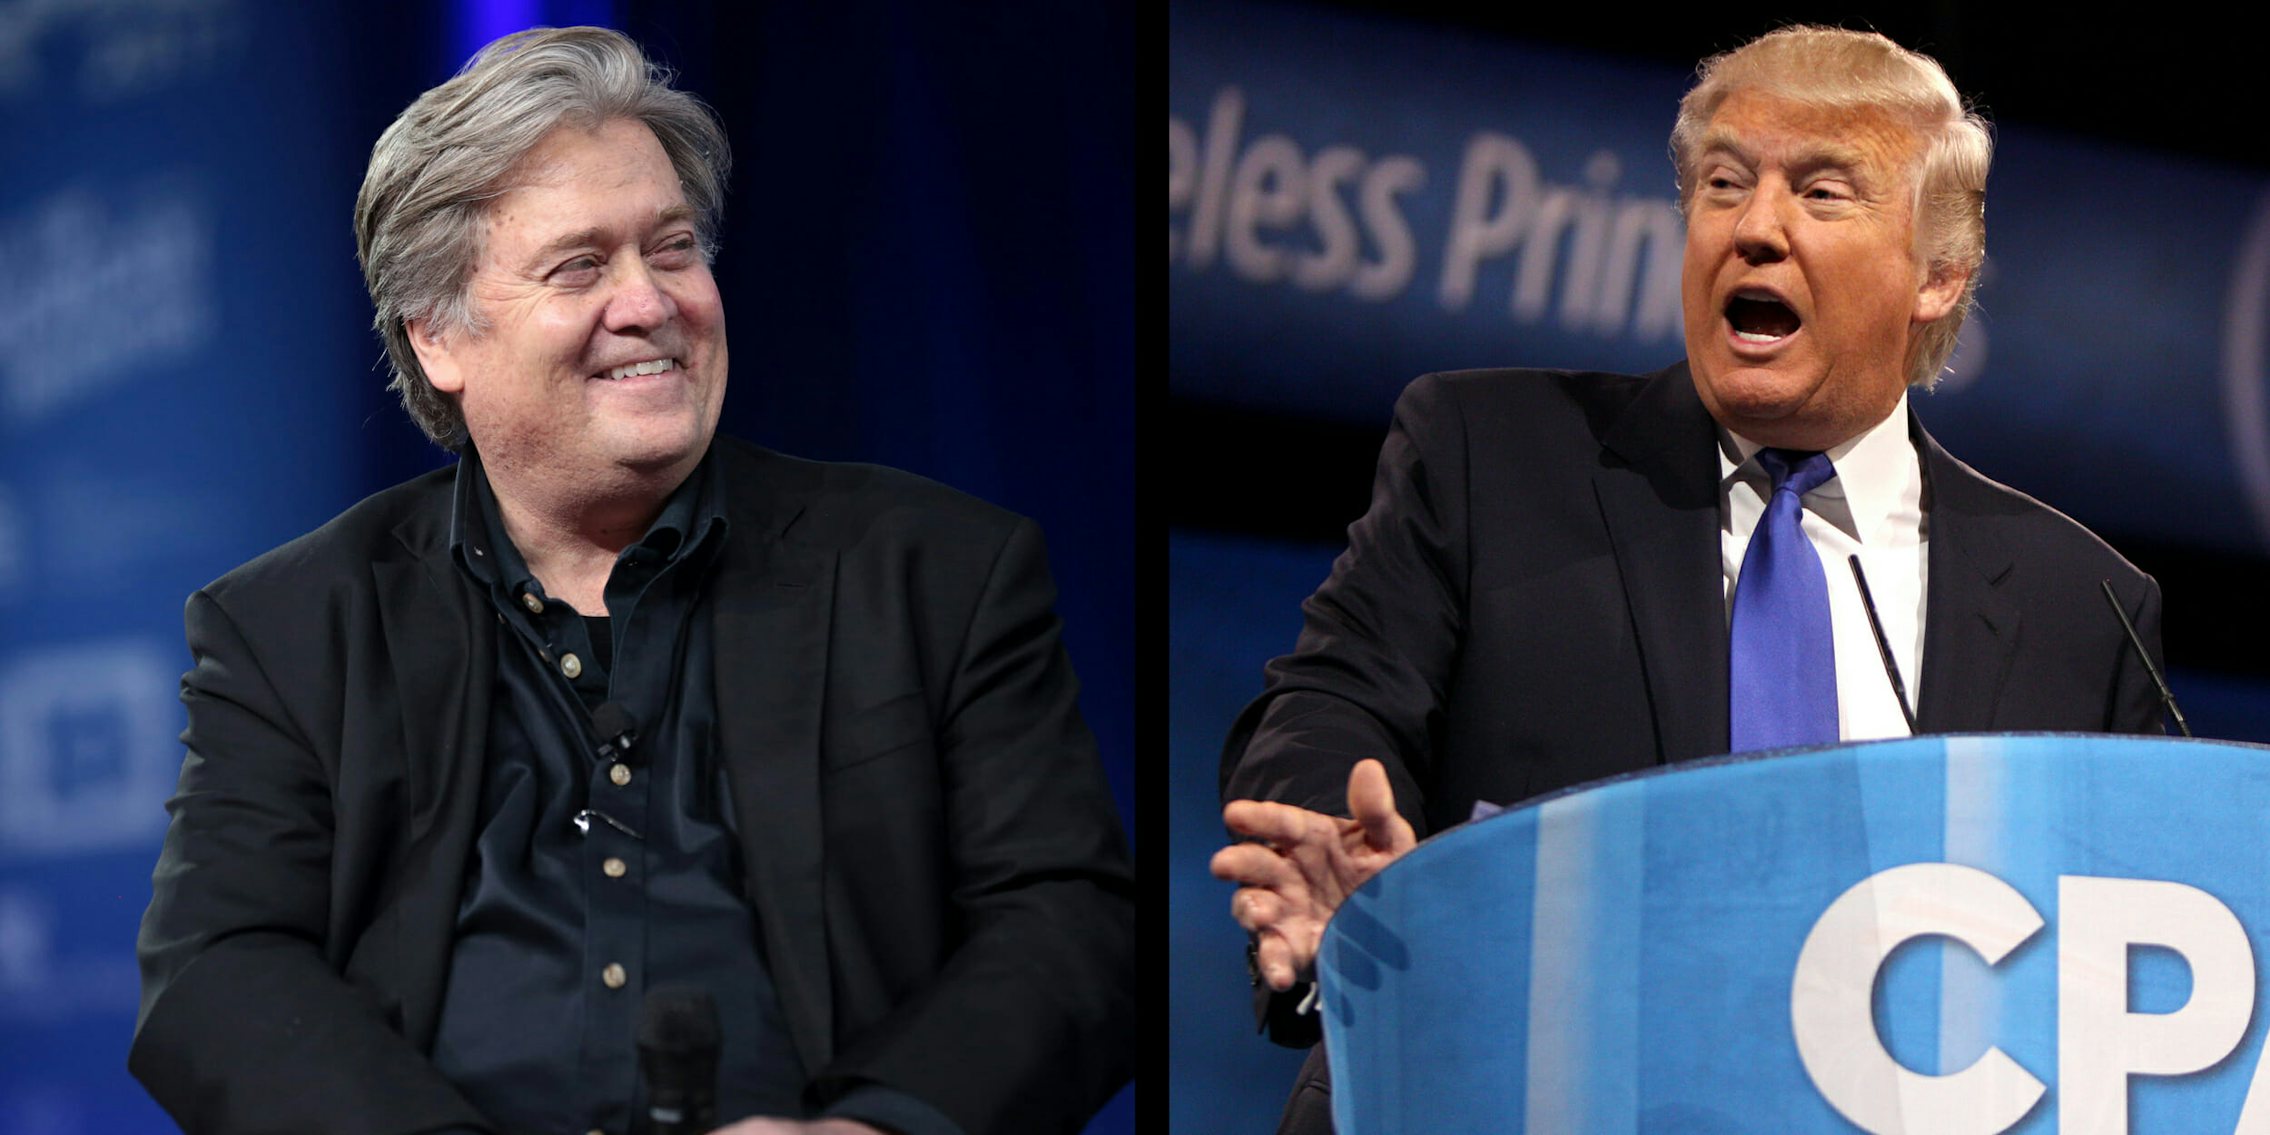 Steve Bannon and Donald Trump are already trying to mend fences following the release of quotes from the former strategist about the president.